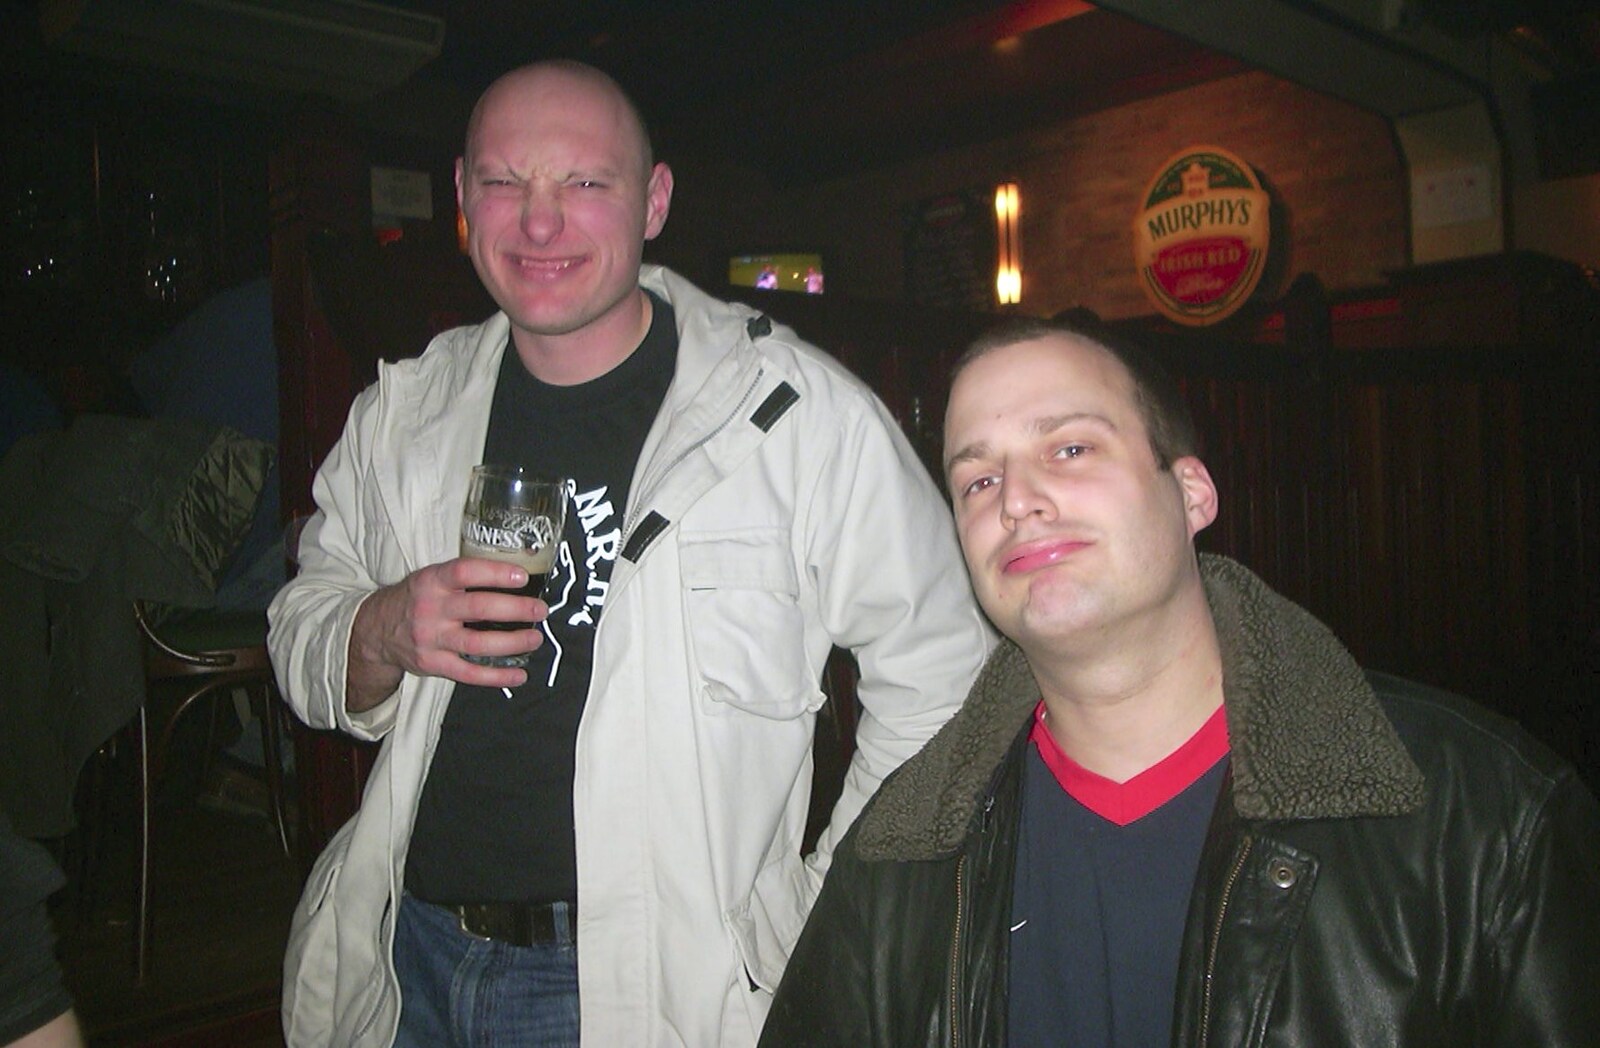 We meet up with Nosher's old school mate Martin from Anne Frank, Markets and Mikey-P's Stag Do, Amsterdam, Netherlands - 6th March 2004